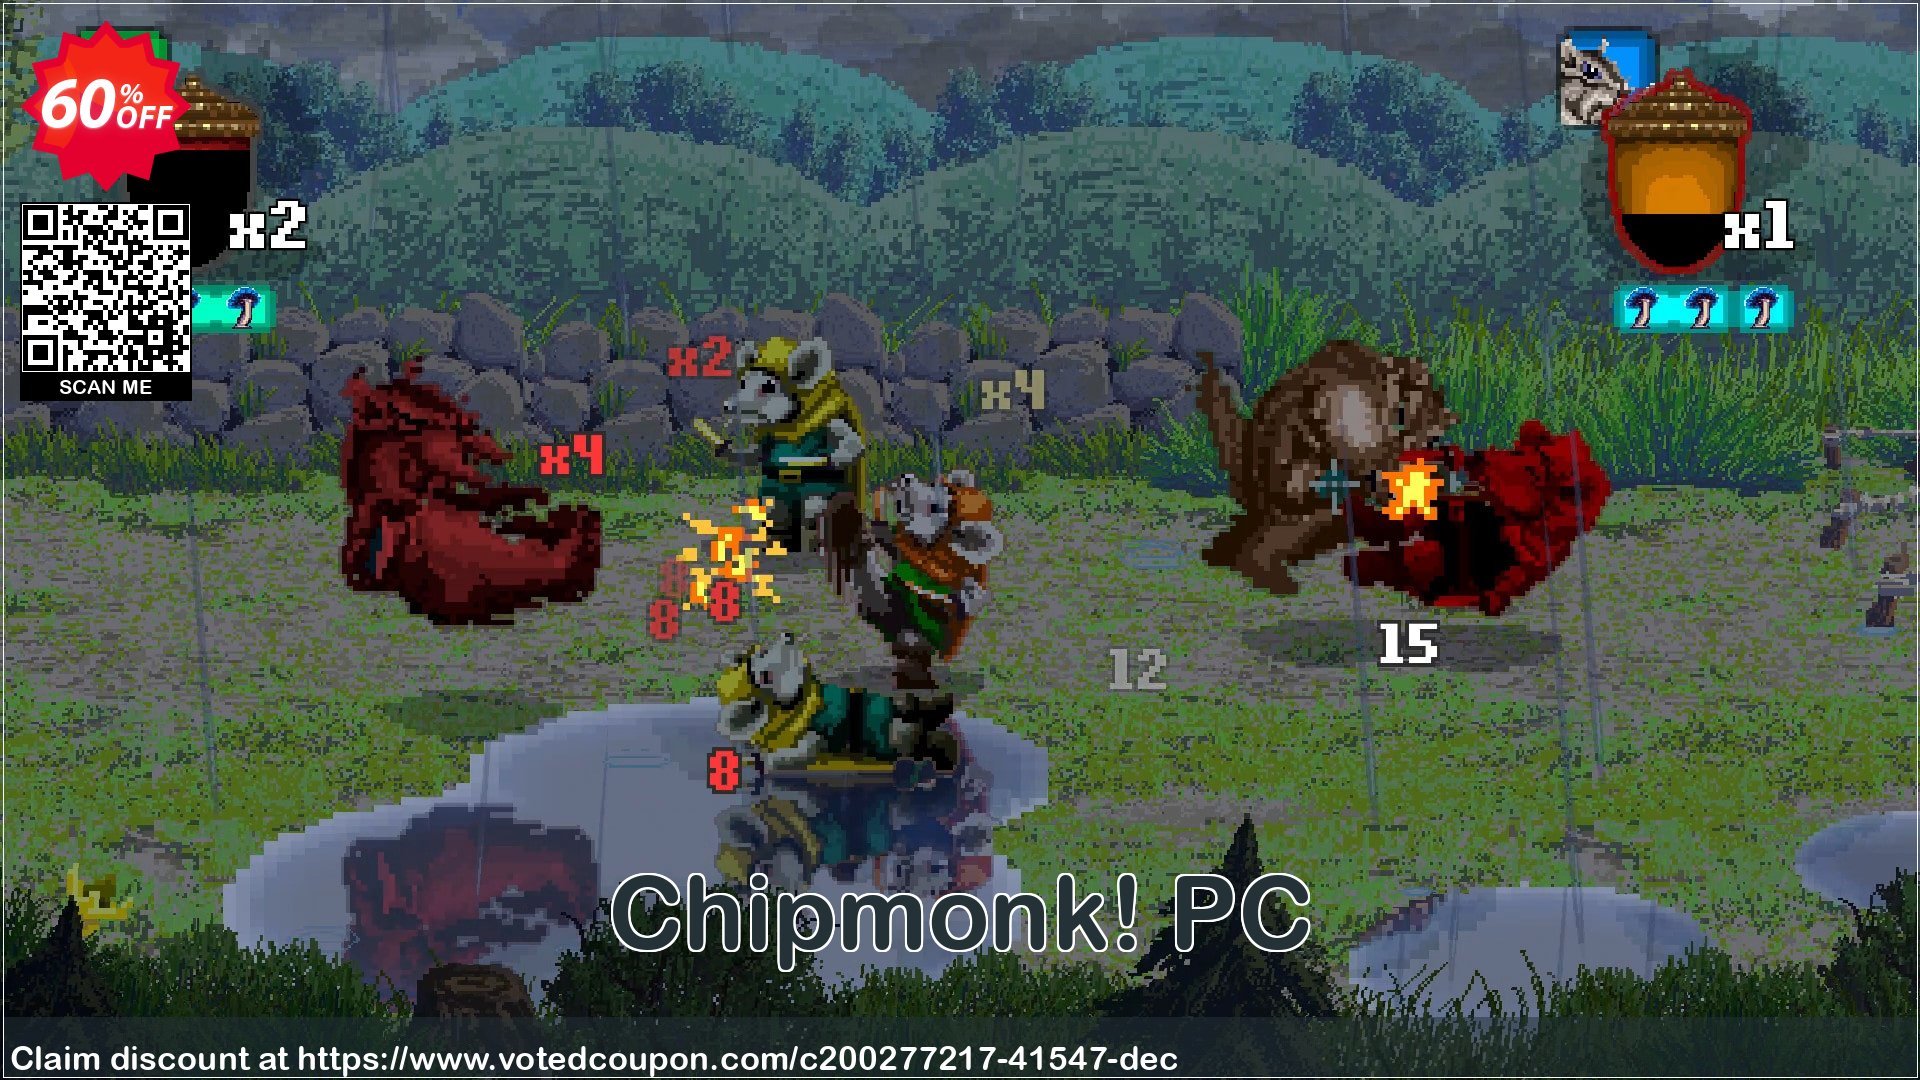 Chipmonk! PC Coupon Code May 2024, 60% OFF - VotedCoupon